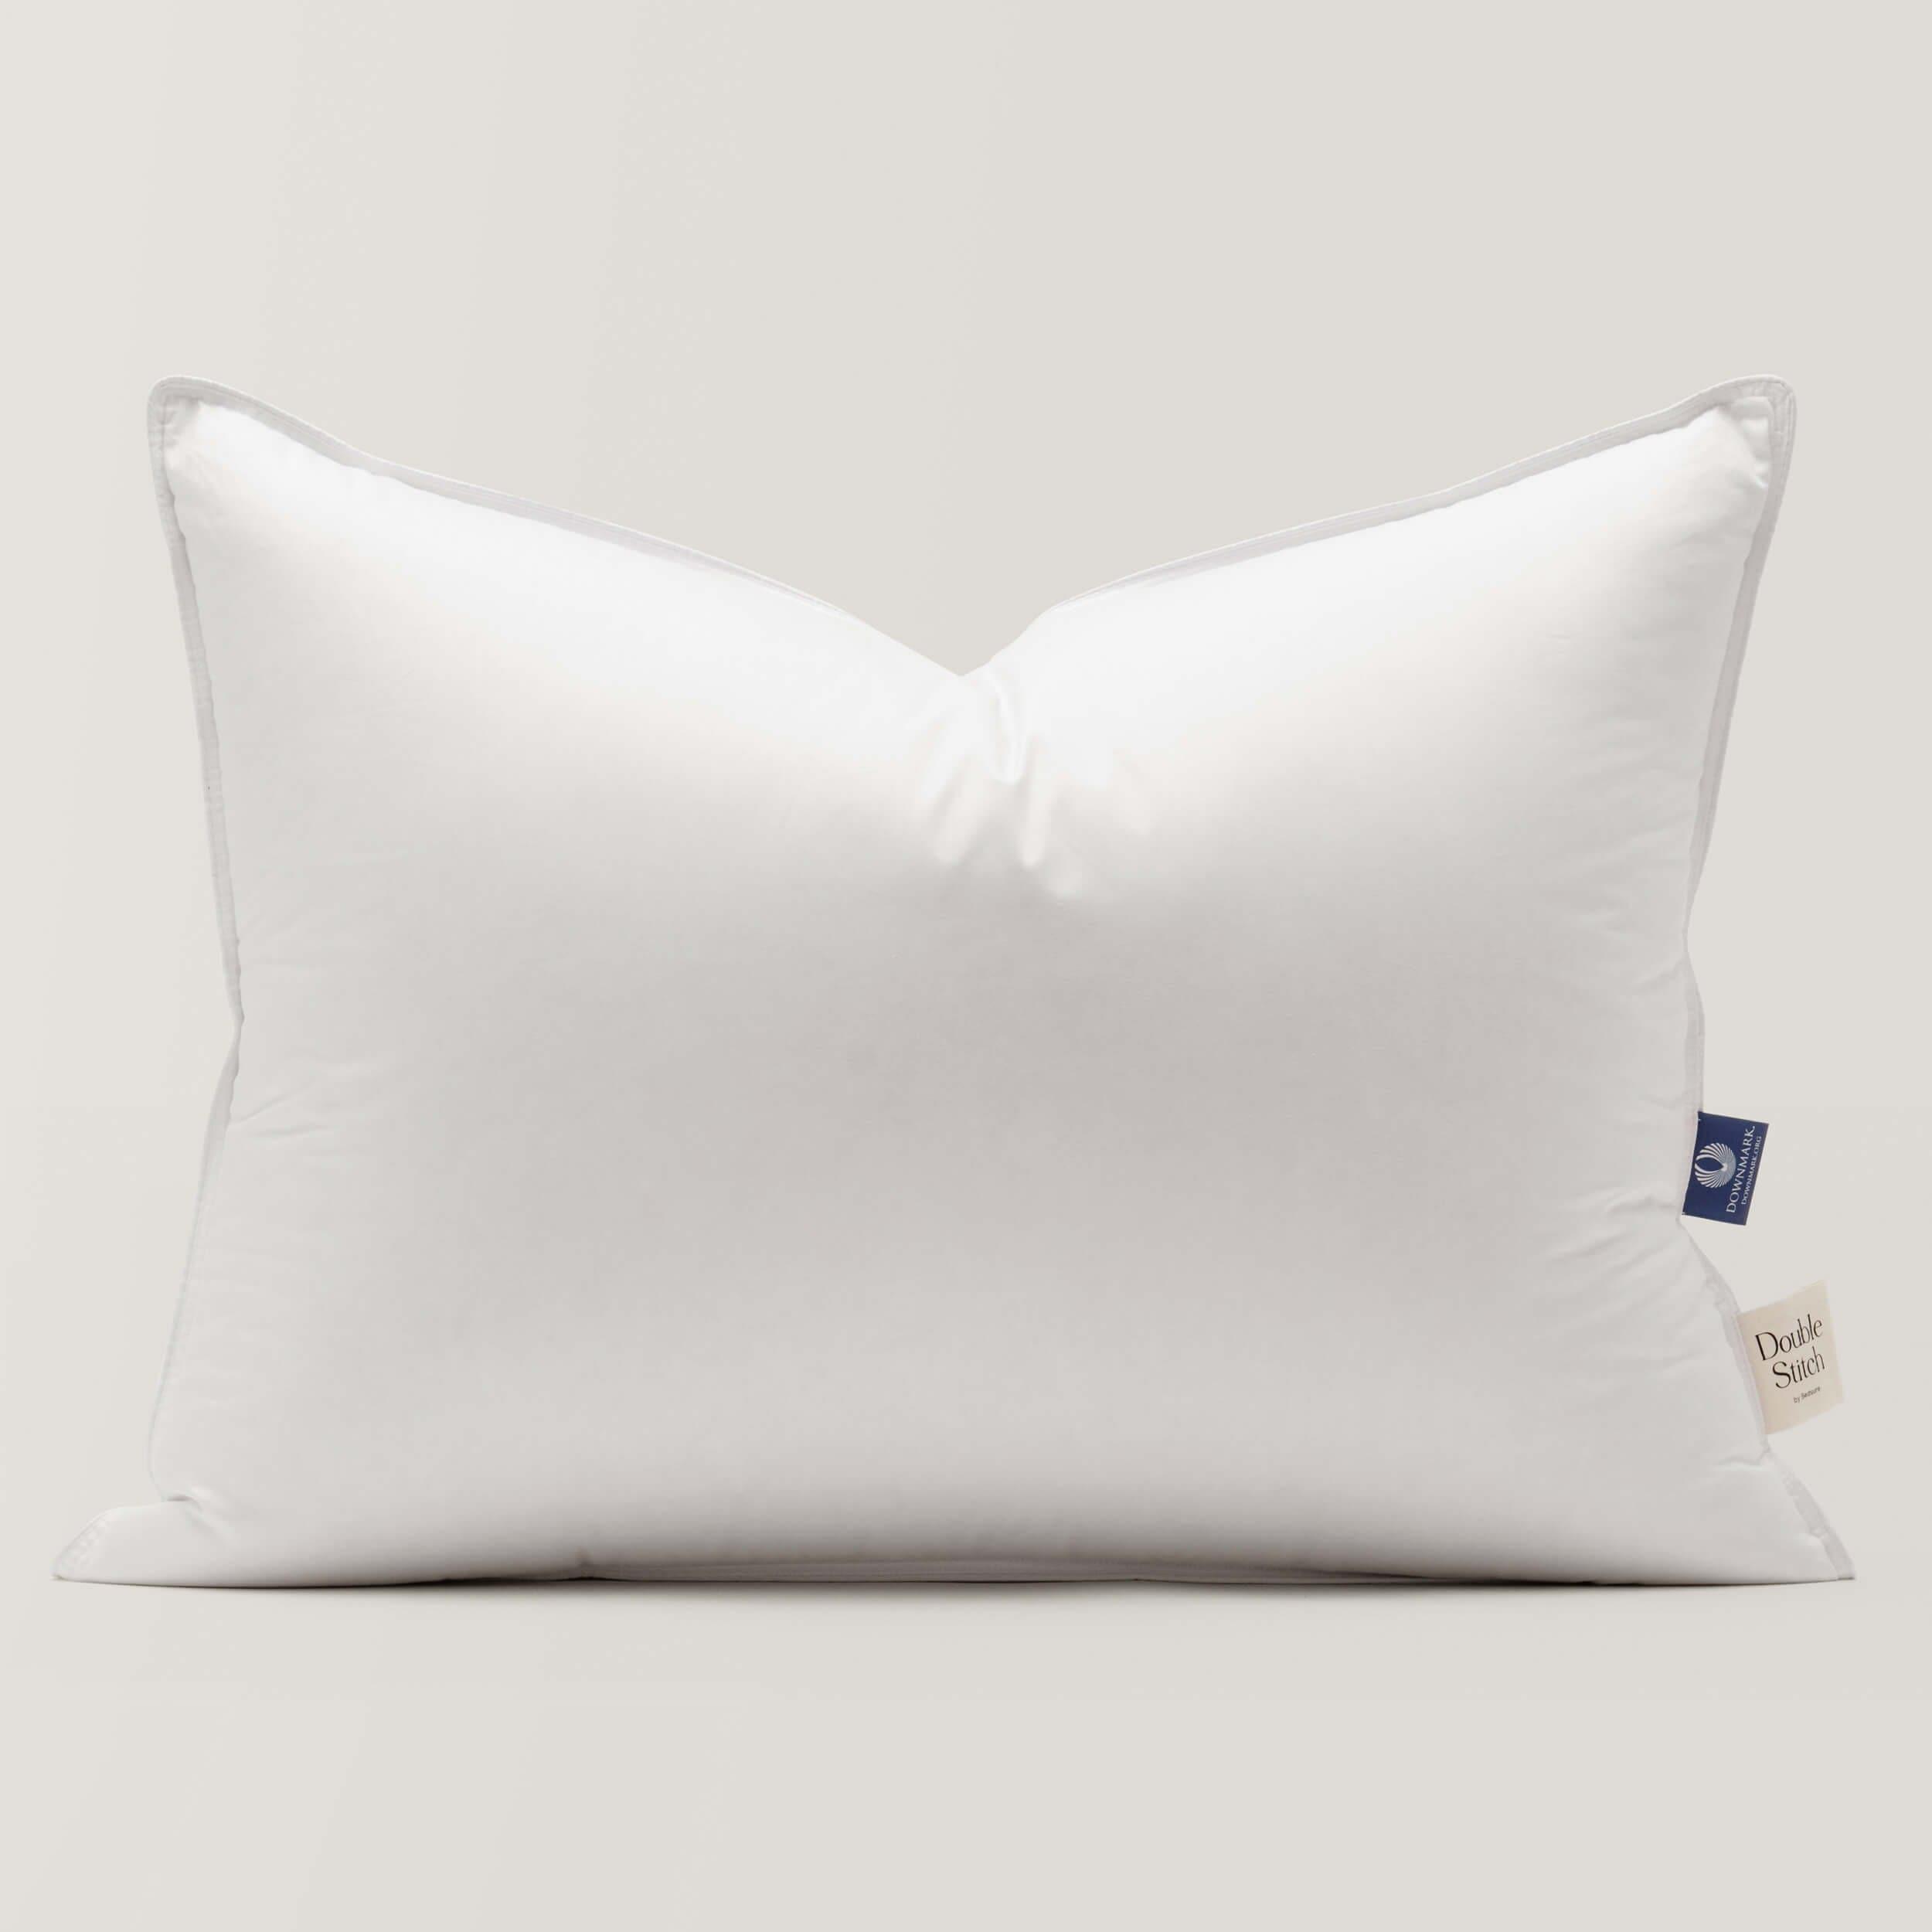 Sink into the luxurious comfort of the down pillow and experience ultimate relaxation.